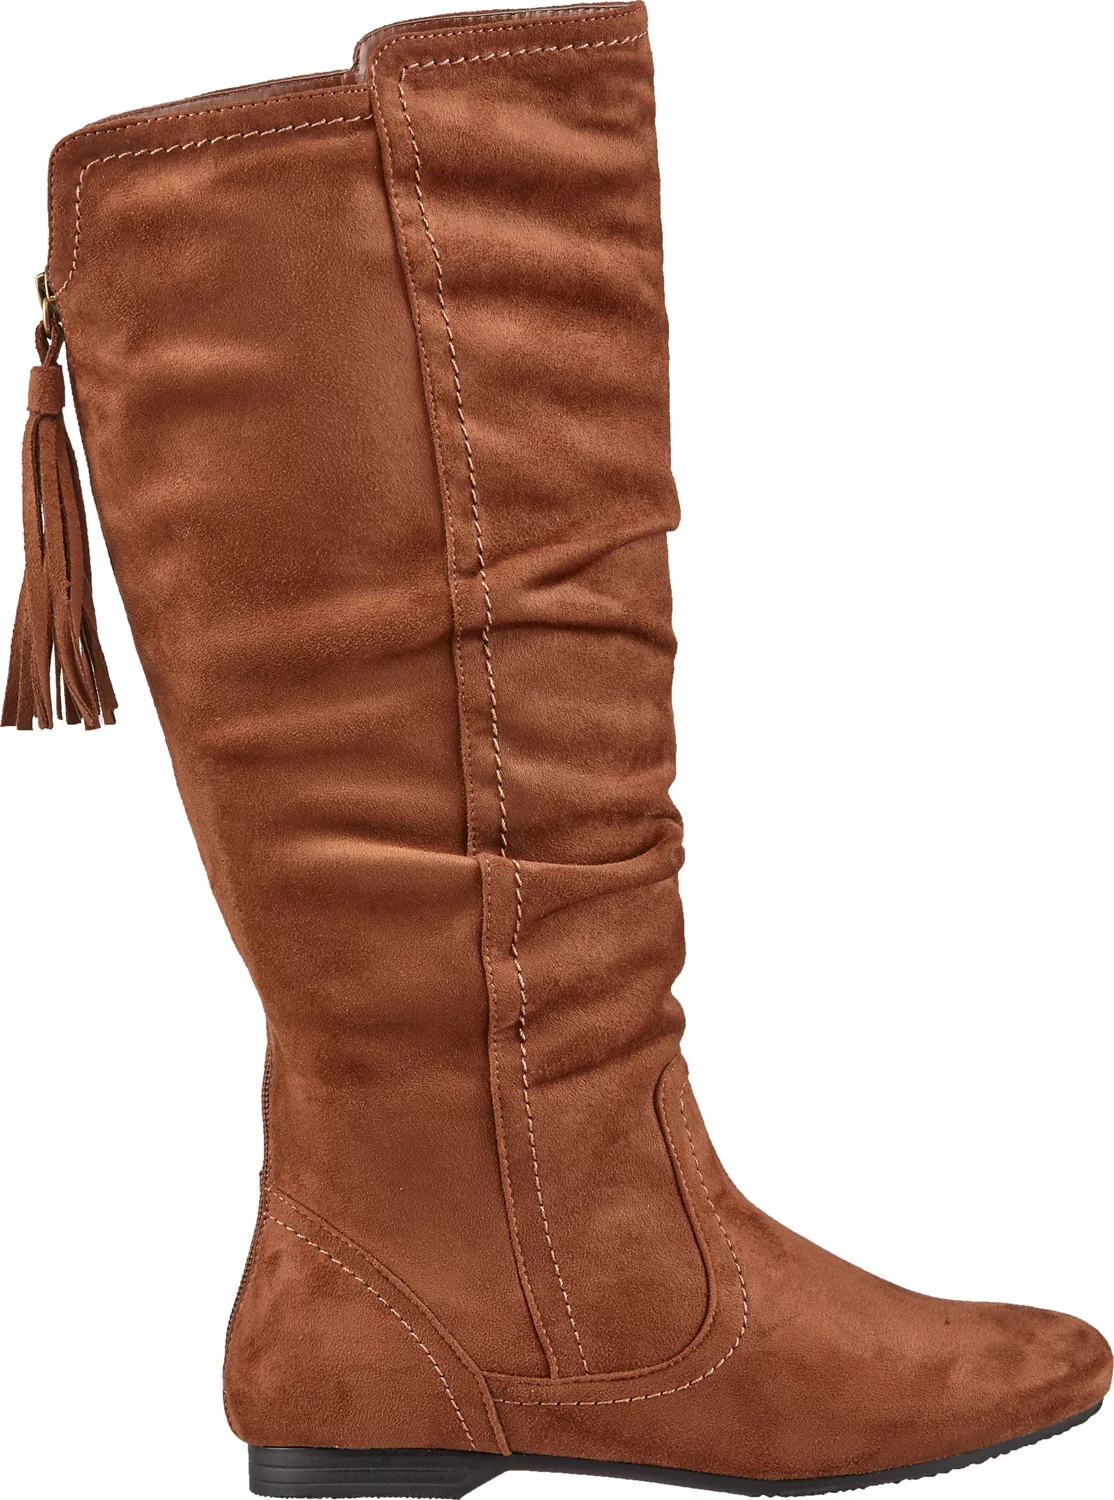 Women's Boots | Boots For Women, Ladies' Boots | Academy